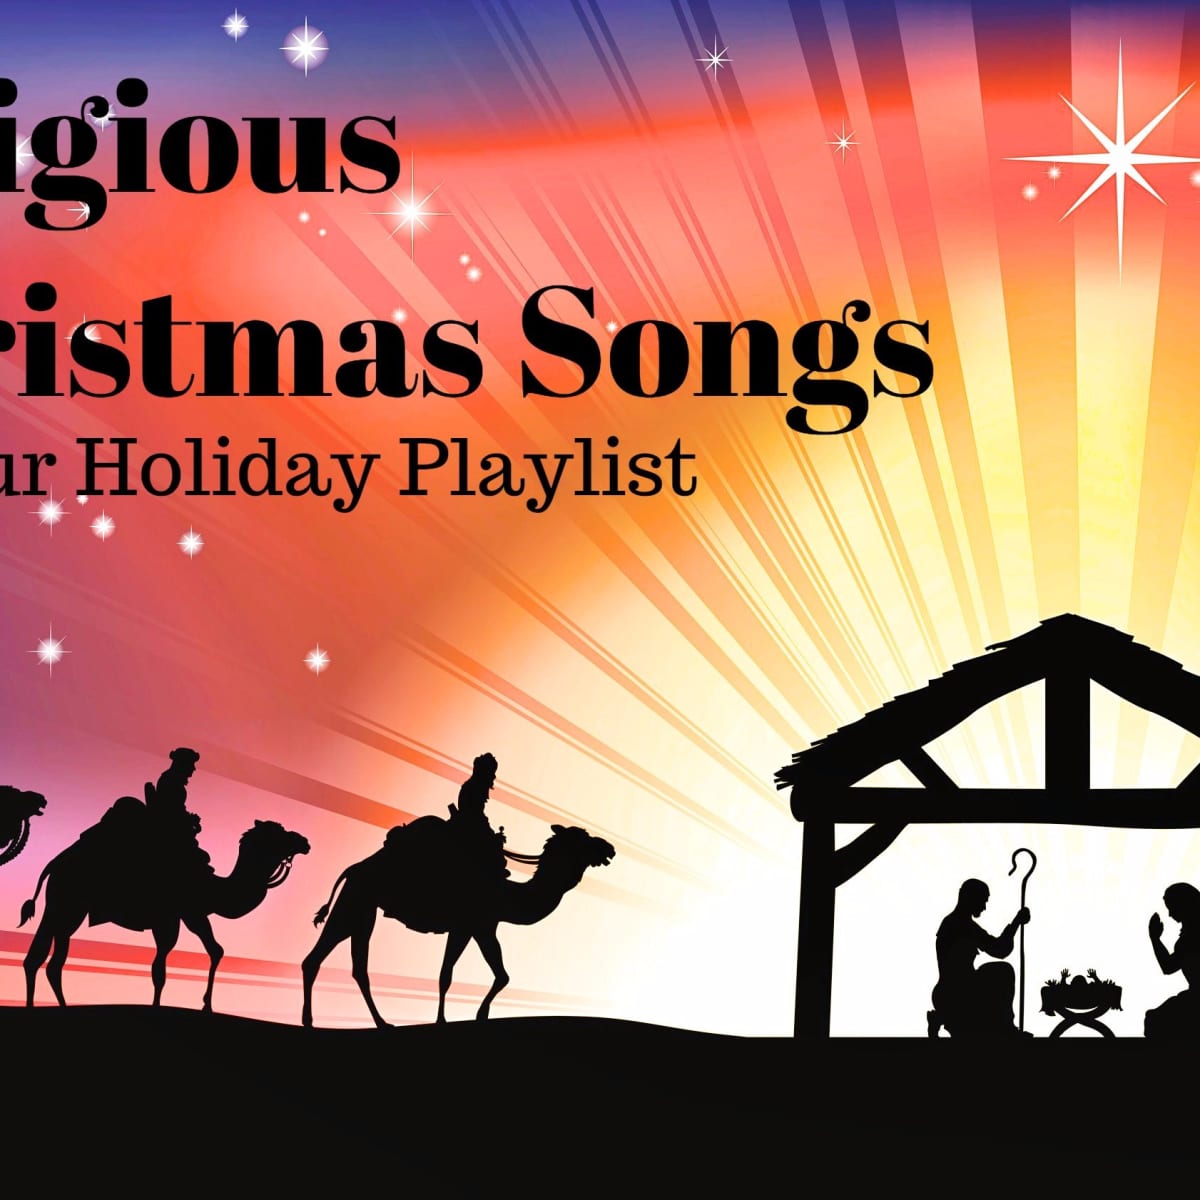 51 Religious Christmas Songs for Your Holiday Playlist - Spinditty